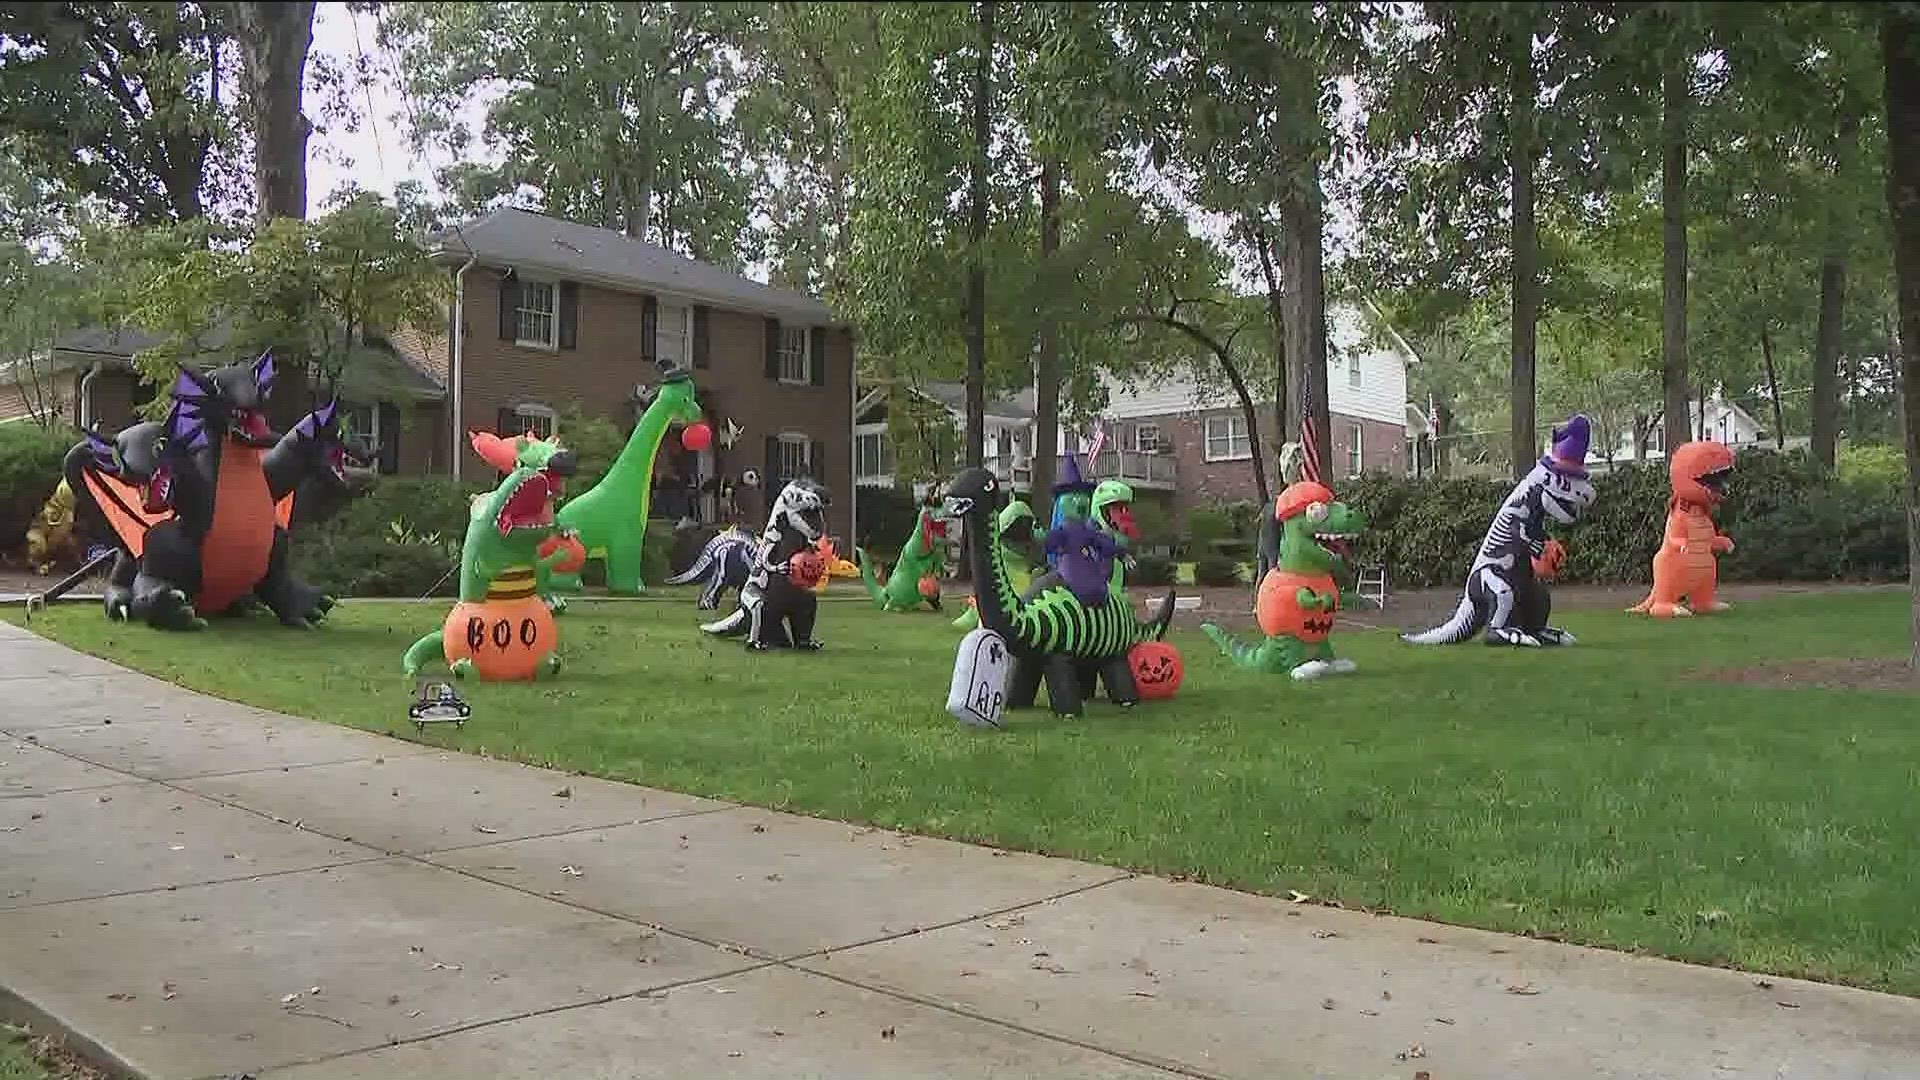 After the city threatened extinction, neighbors rallied to rescue the dinosaurs.